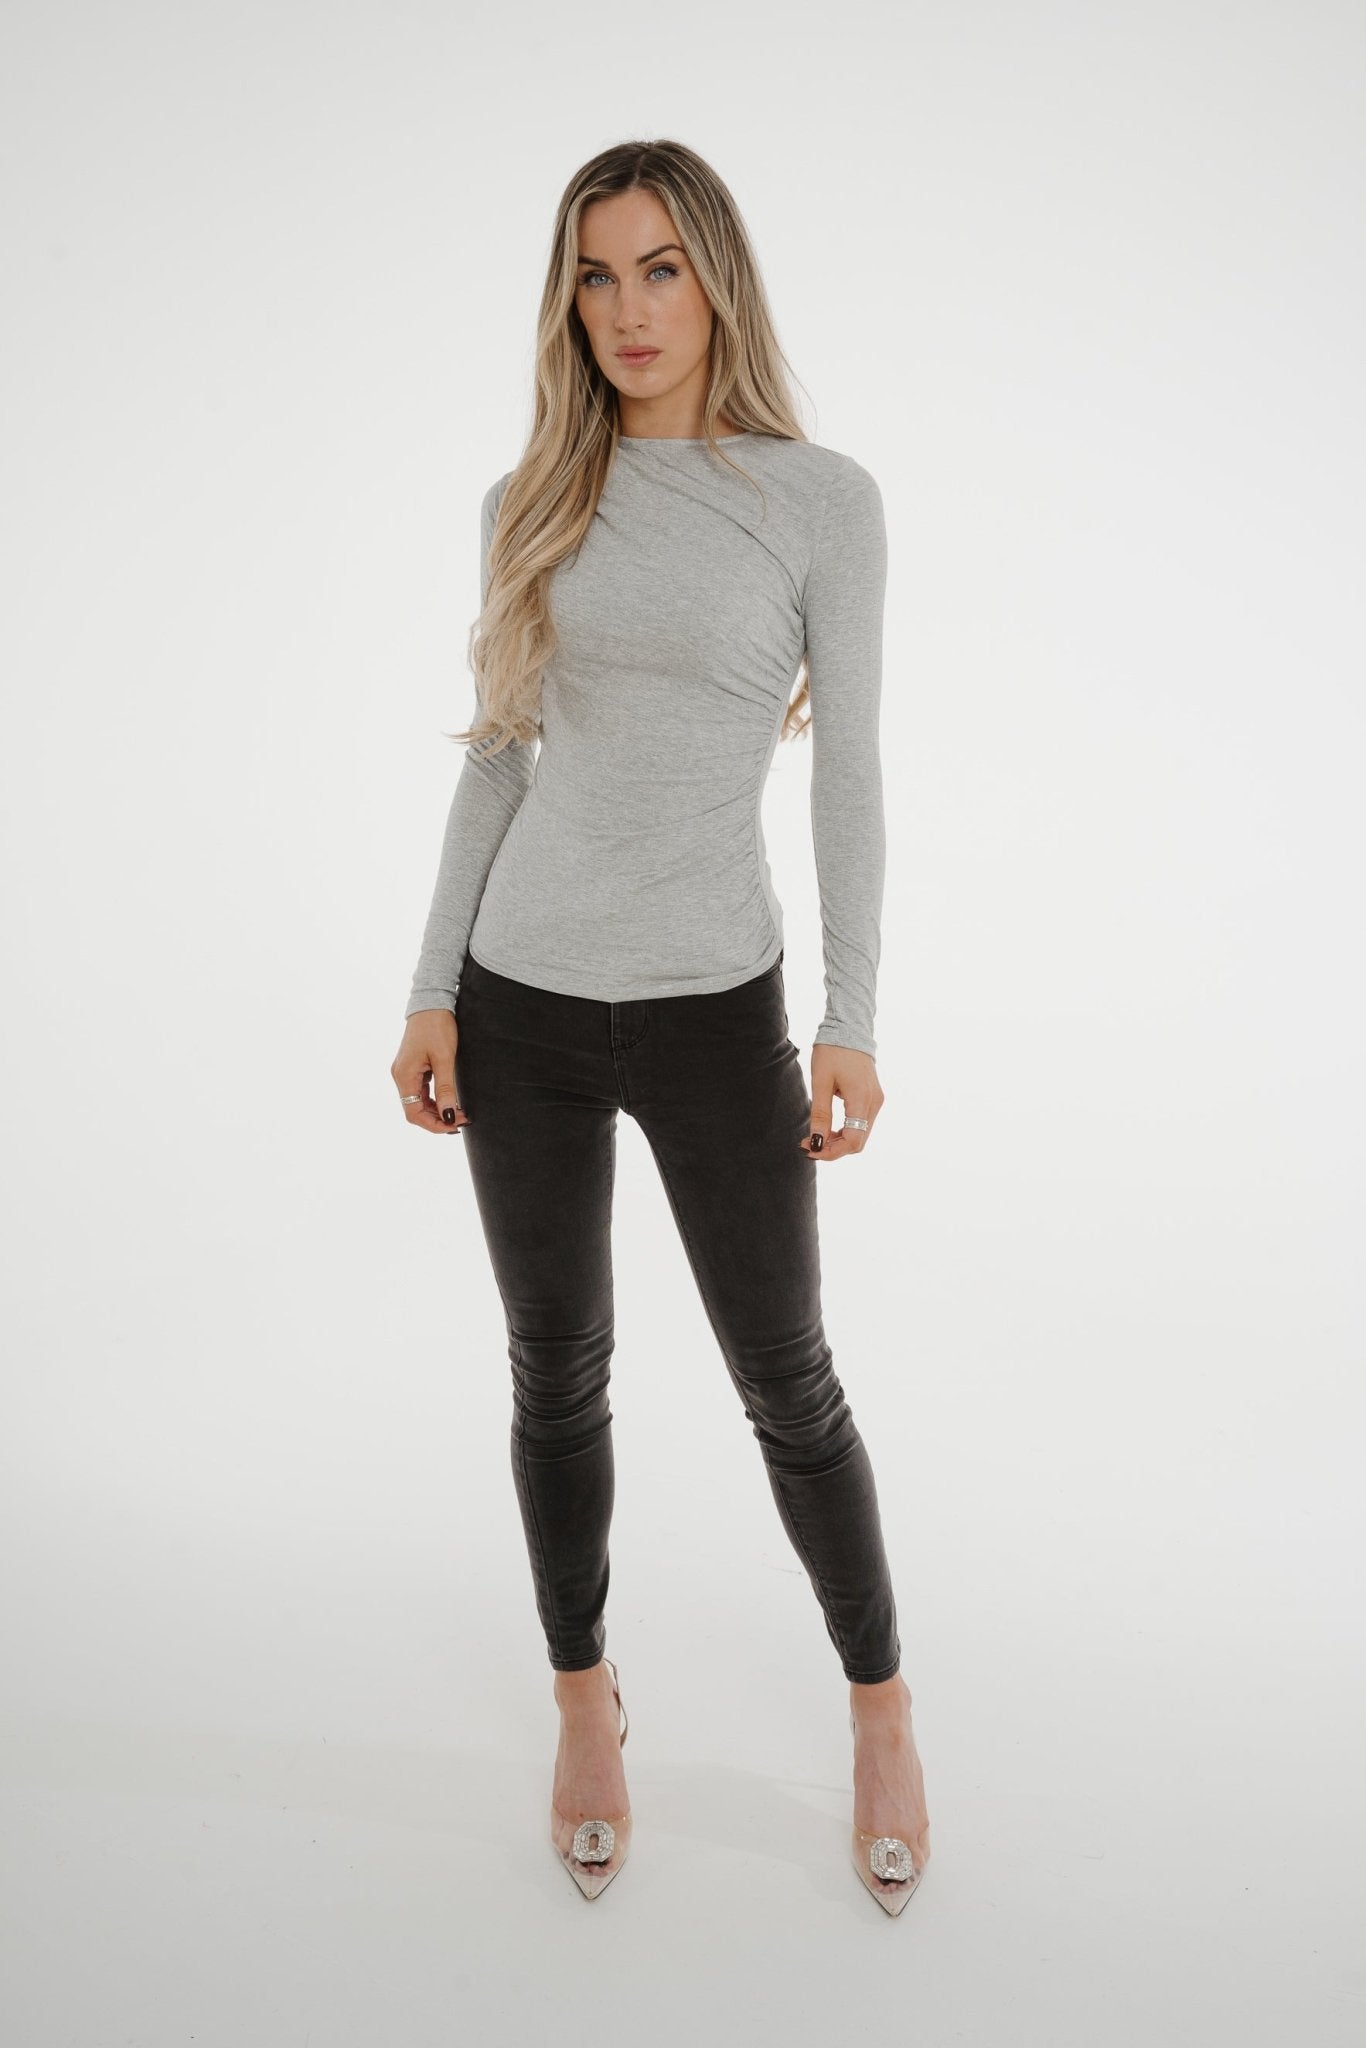 Kate Ruched Top In Grey - The Walk in Wardrobe